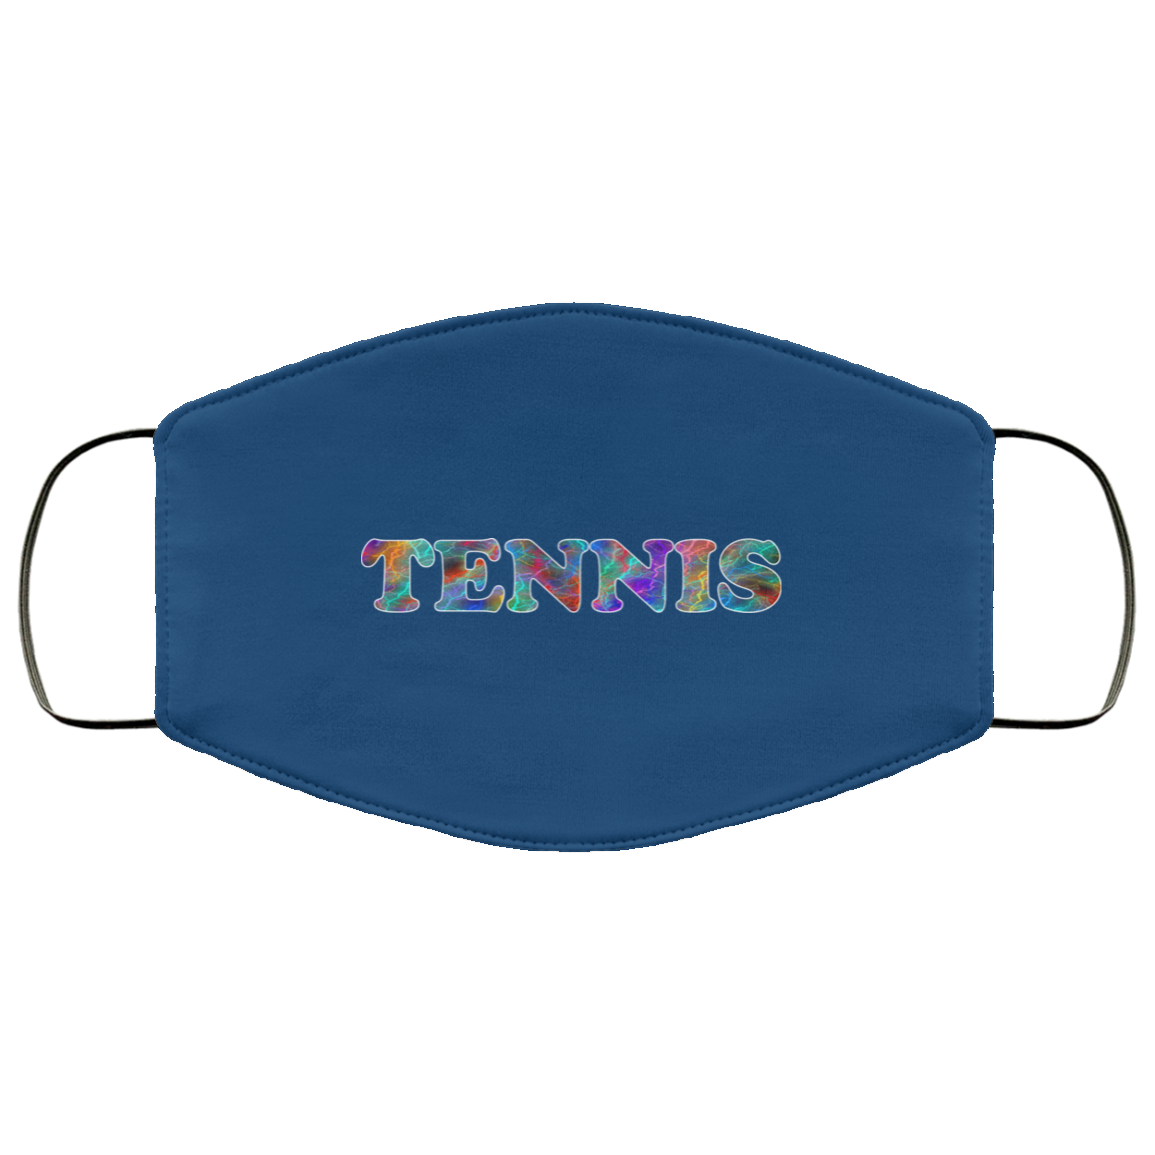 Tennis 2 Layer Protective Mask